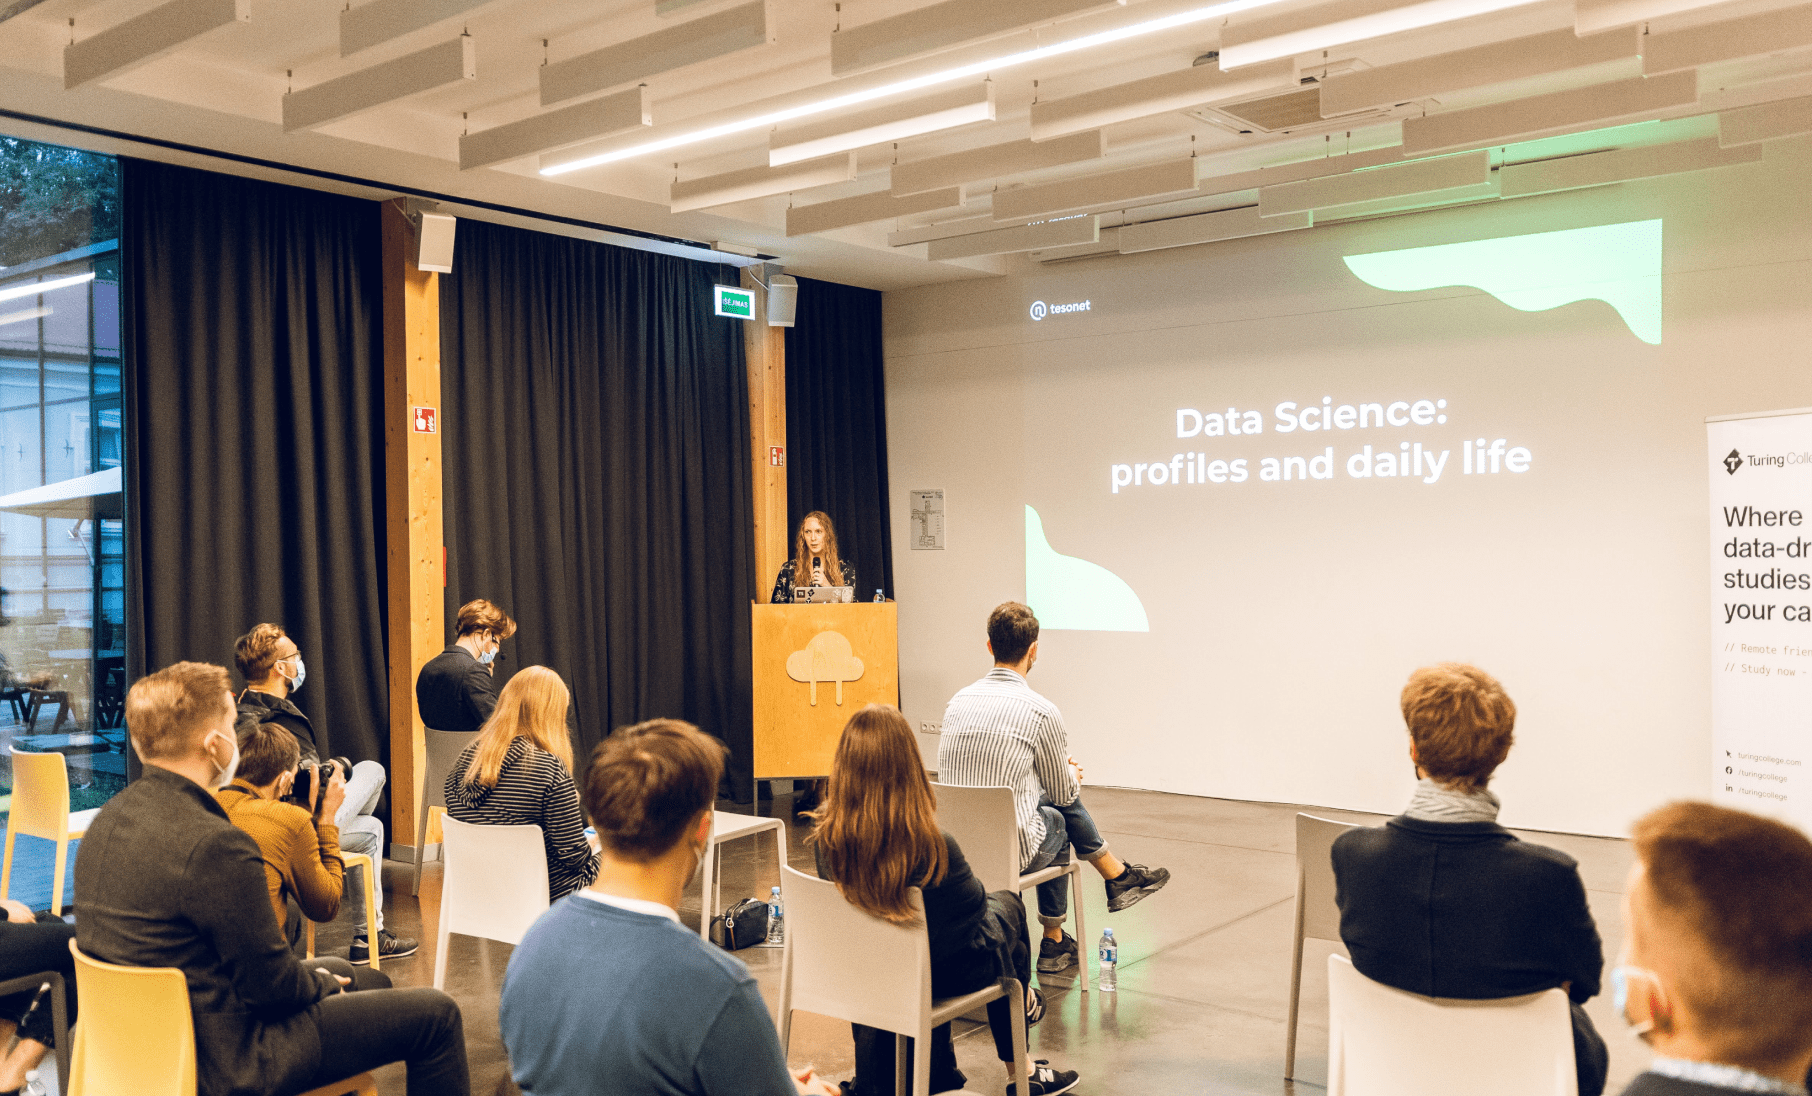 Laura Simutienė giving a talk about data science